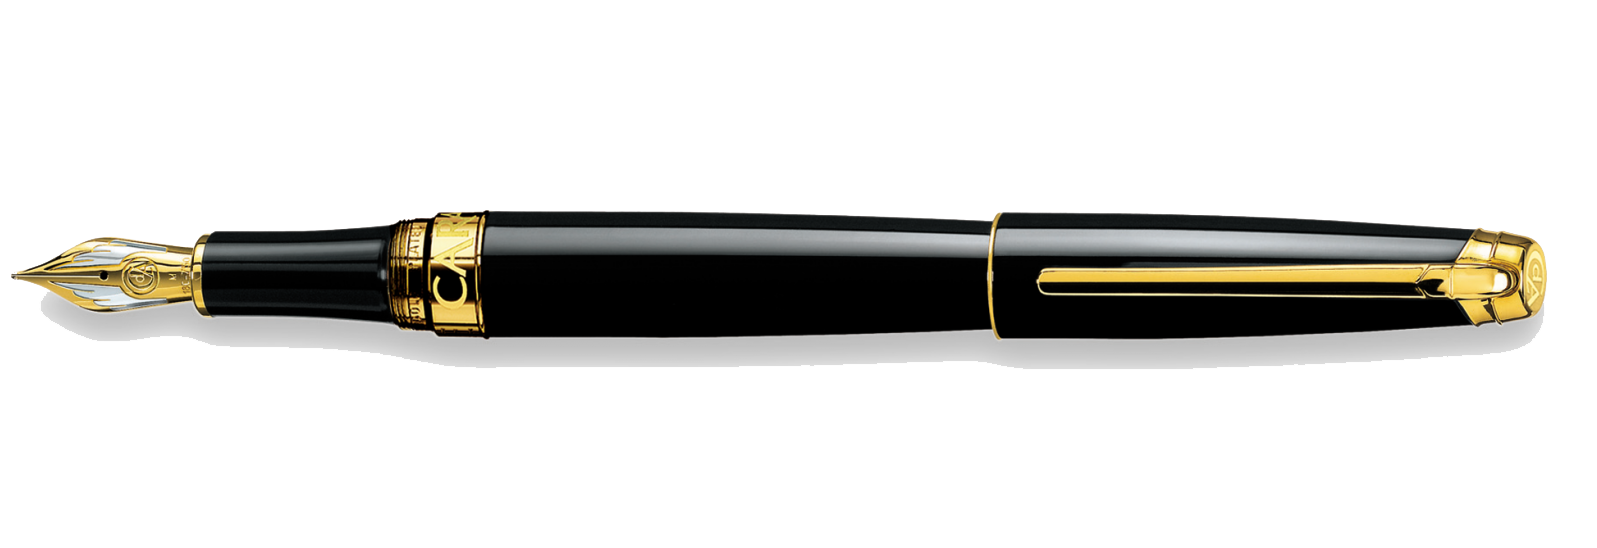 Fountain Pen Png Image #43192   Pen Png   Pen Hd Png - Fountain, Transparent background PNG HD thumbnail